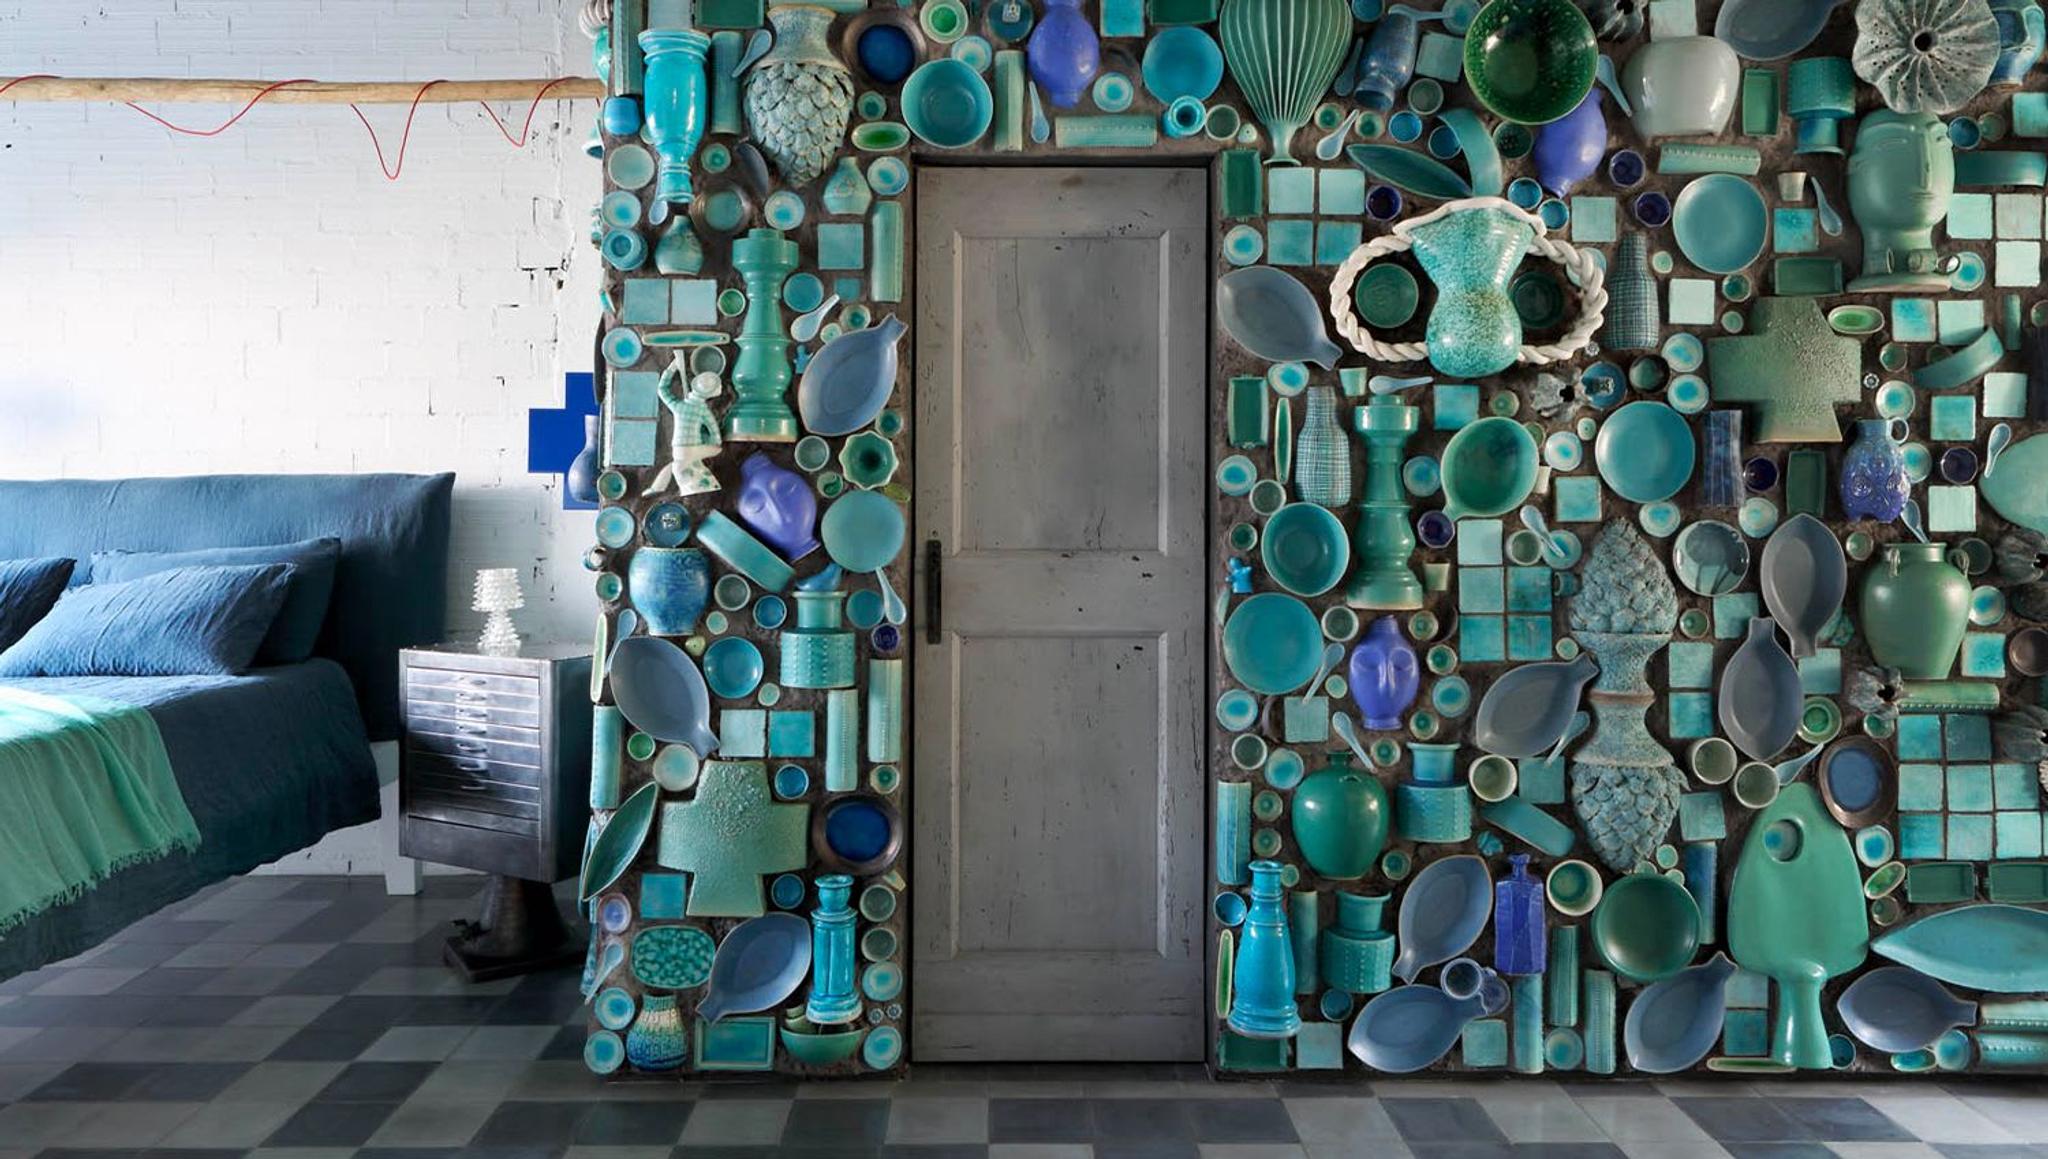 The "magic wall" in Paola Navone's home. Photography by Enrico Conti